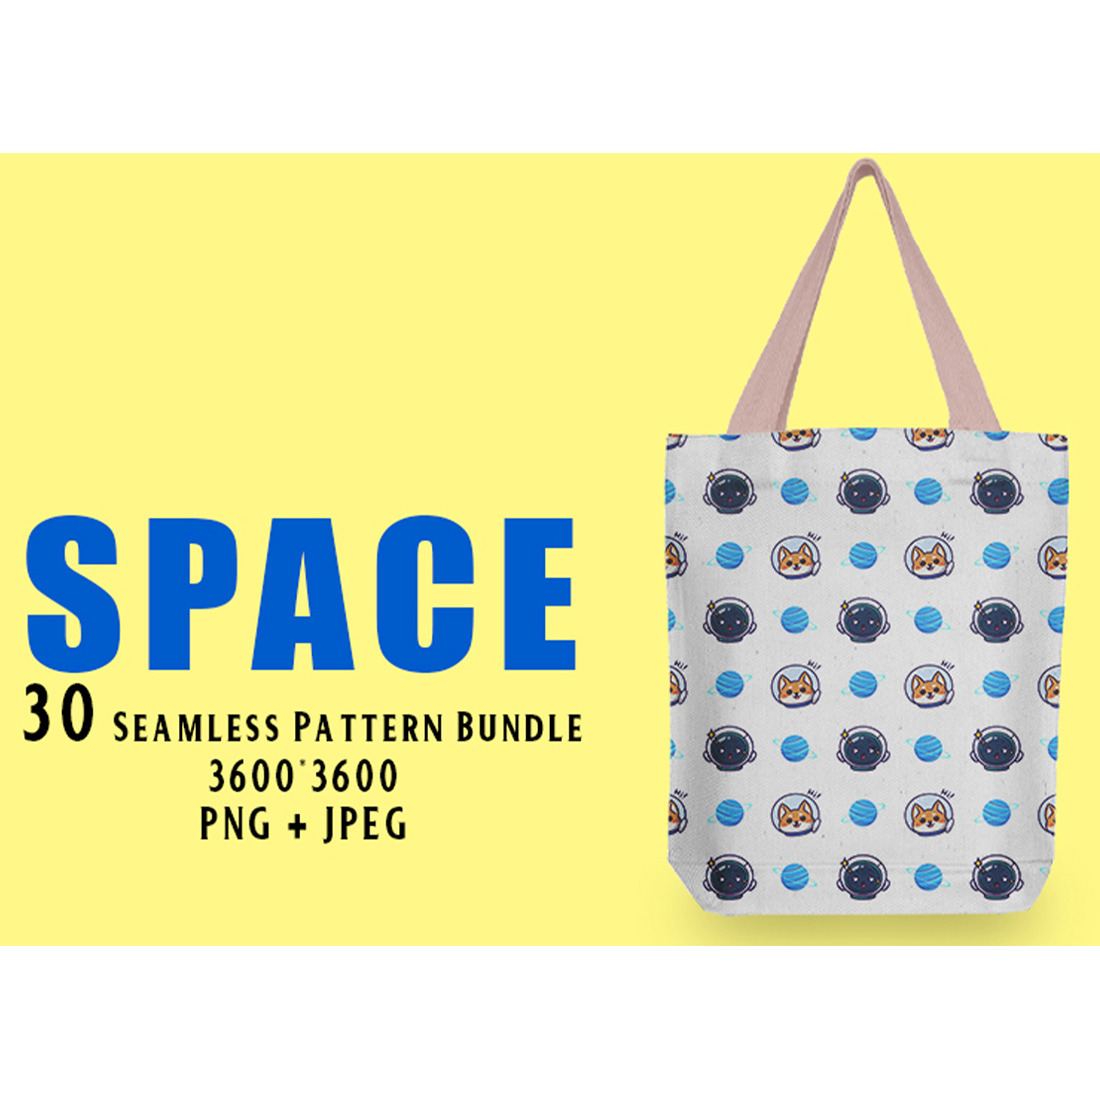 Image of a bag with enchanting patterns on the theme of space